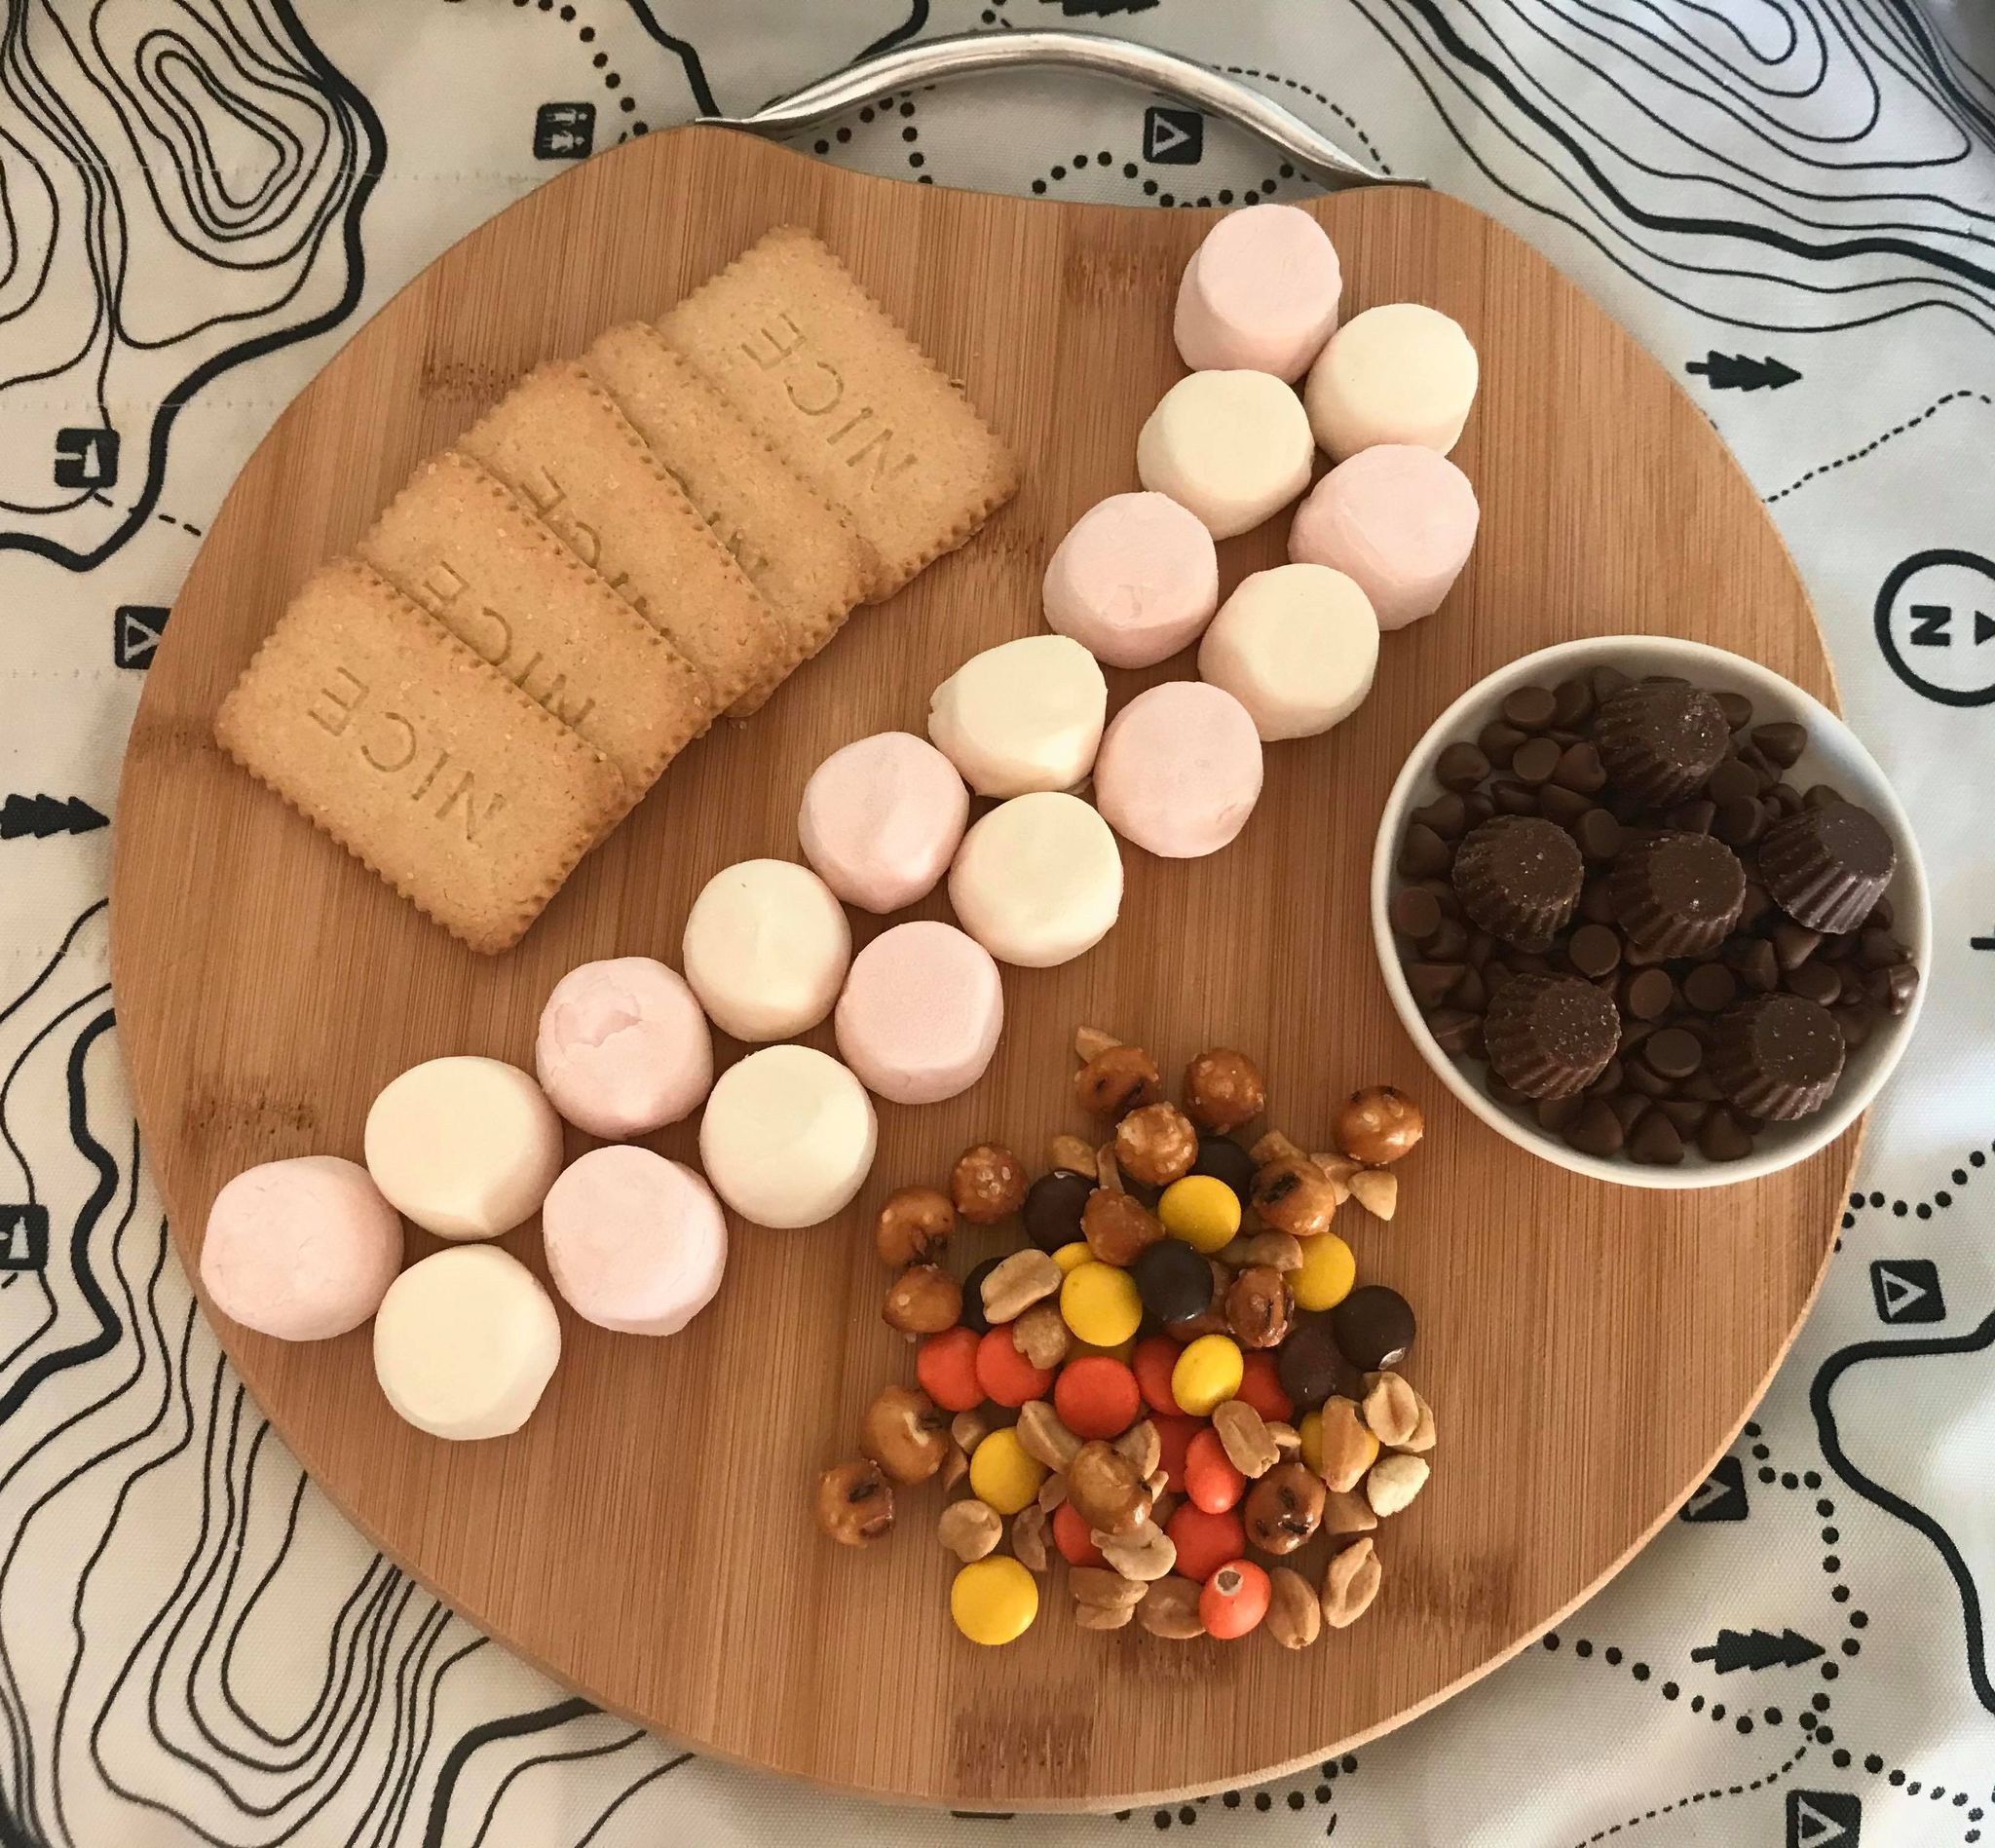 a round wooden board with biscuits, marshmallows, small candies, and chocolate dipping sauce arranged on it